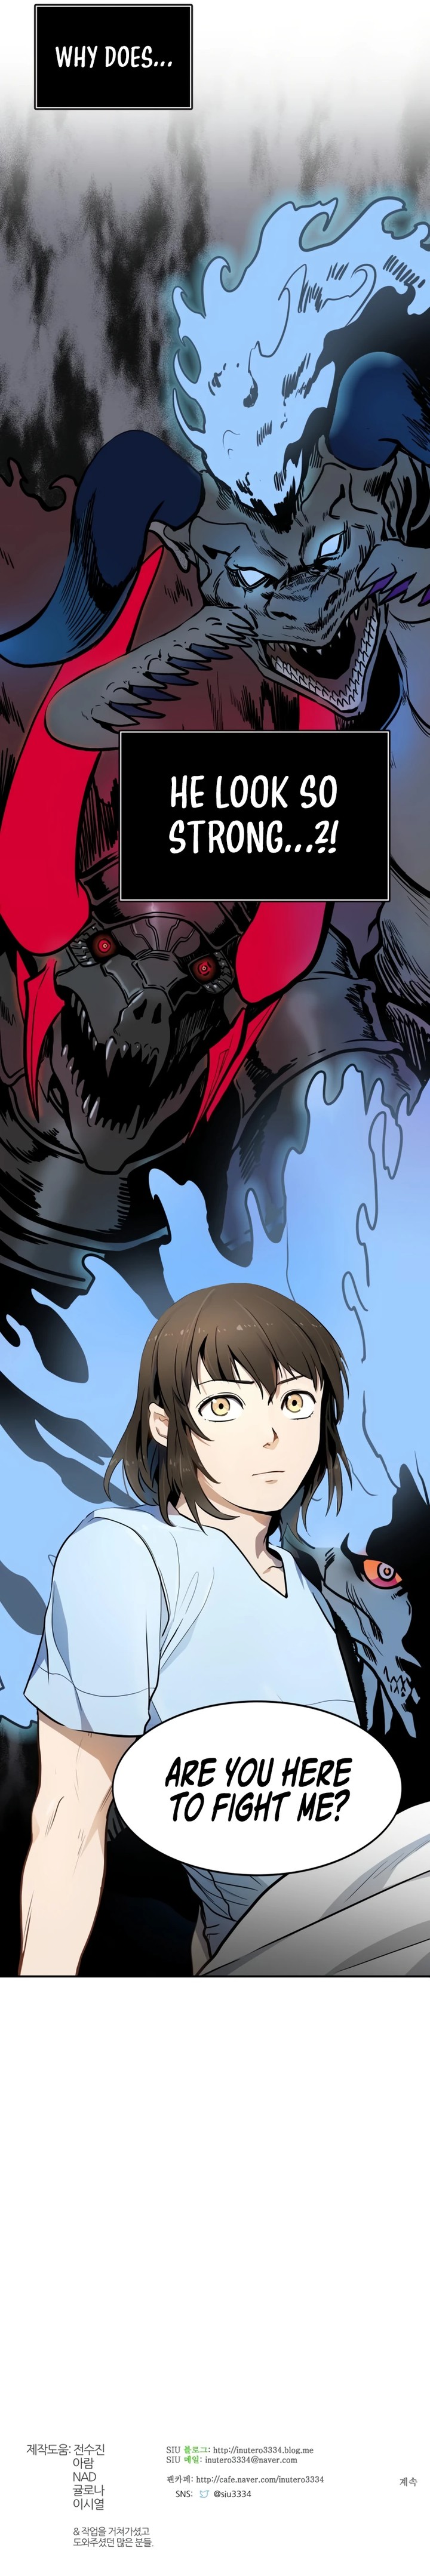 Tower Of God 553 16